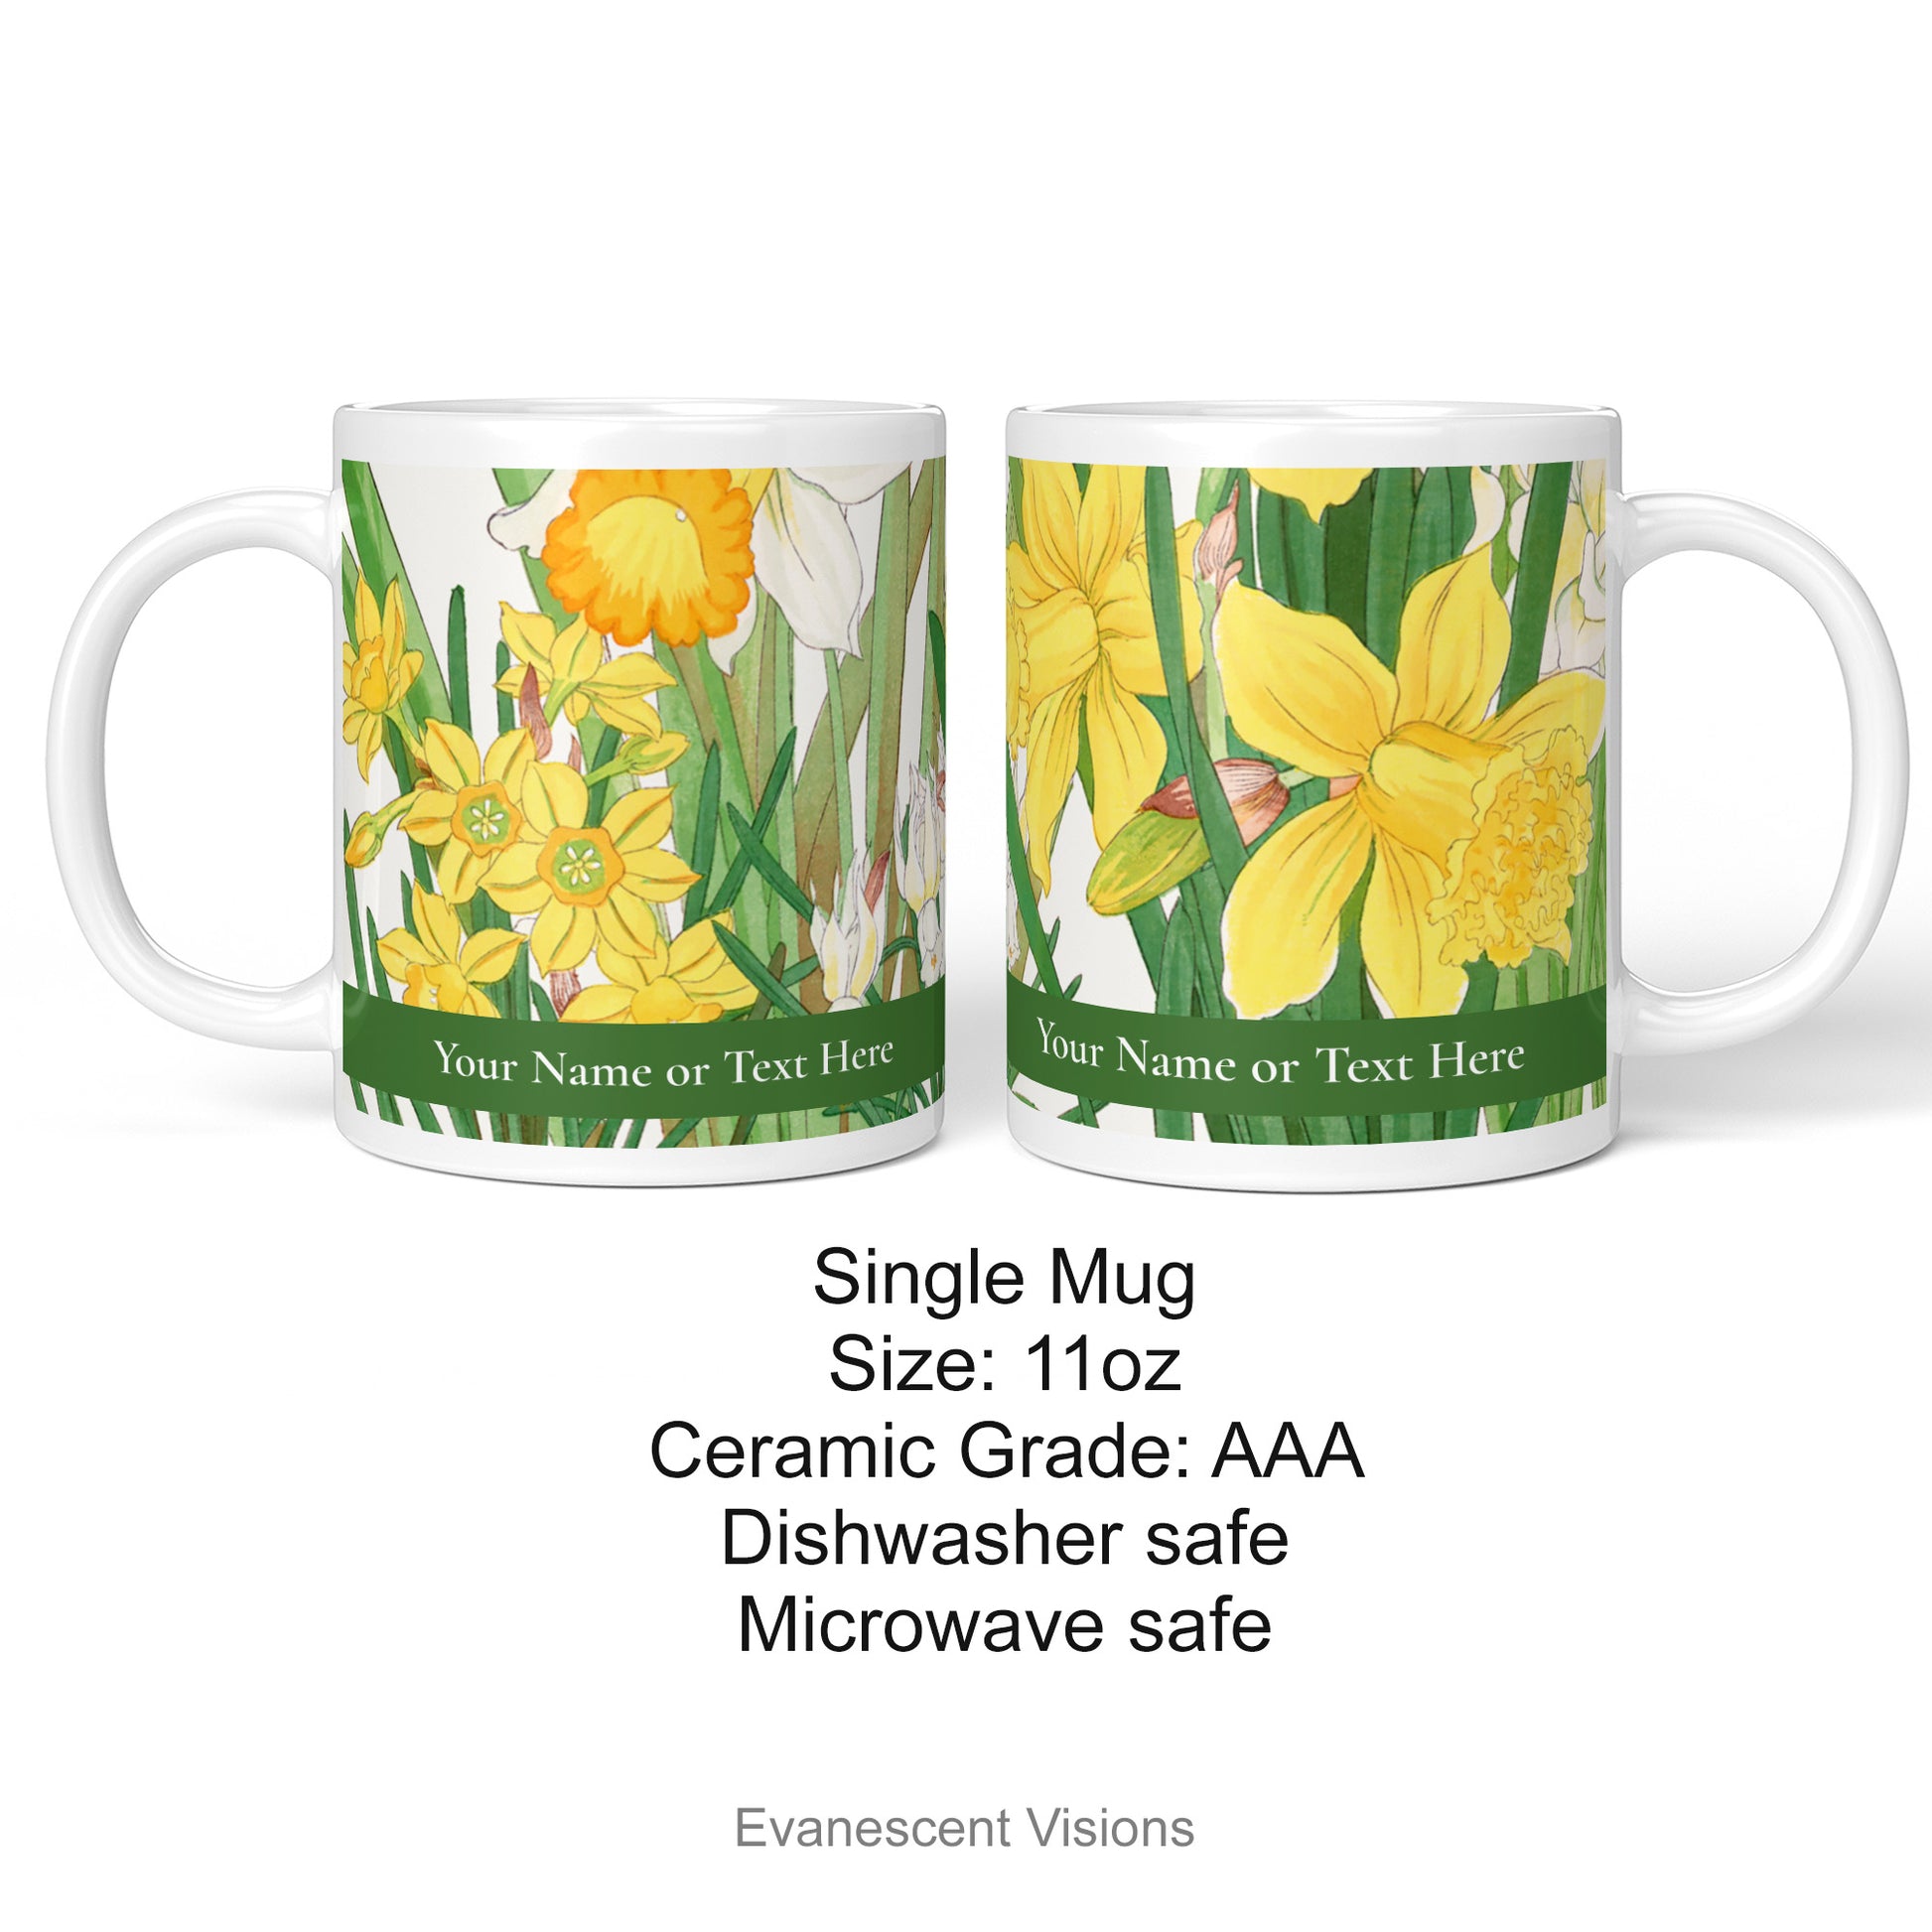 Personalised mug shown on both sides with design from a woodblock painting of Spring Daffodil Flowers by artist Kônan Tanigami (1917-1924) and product details